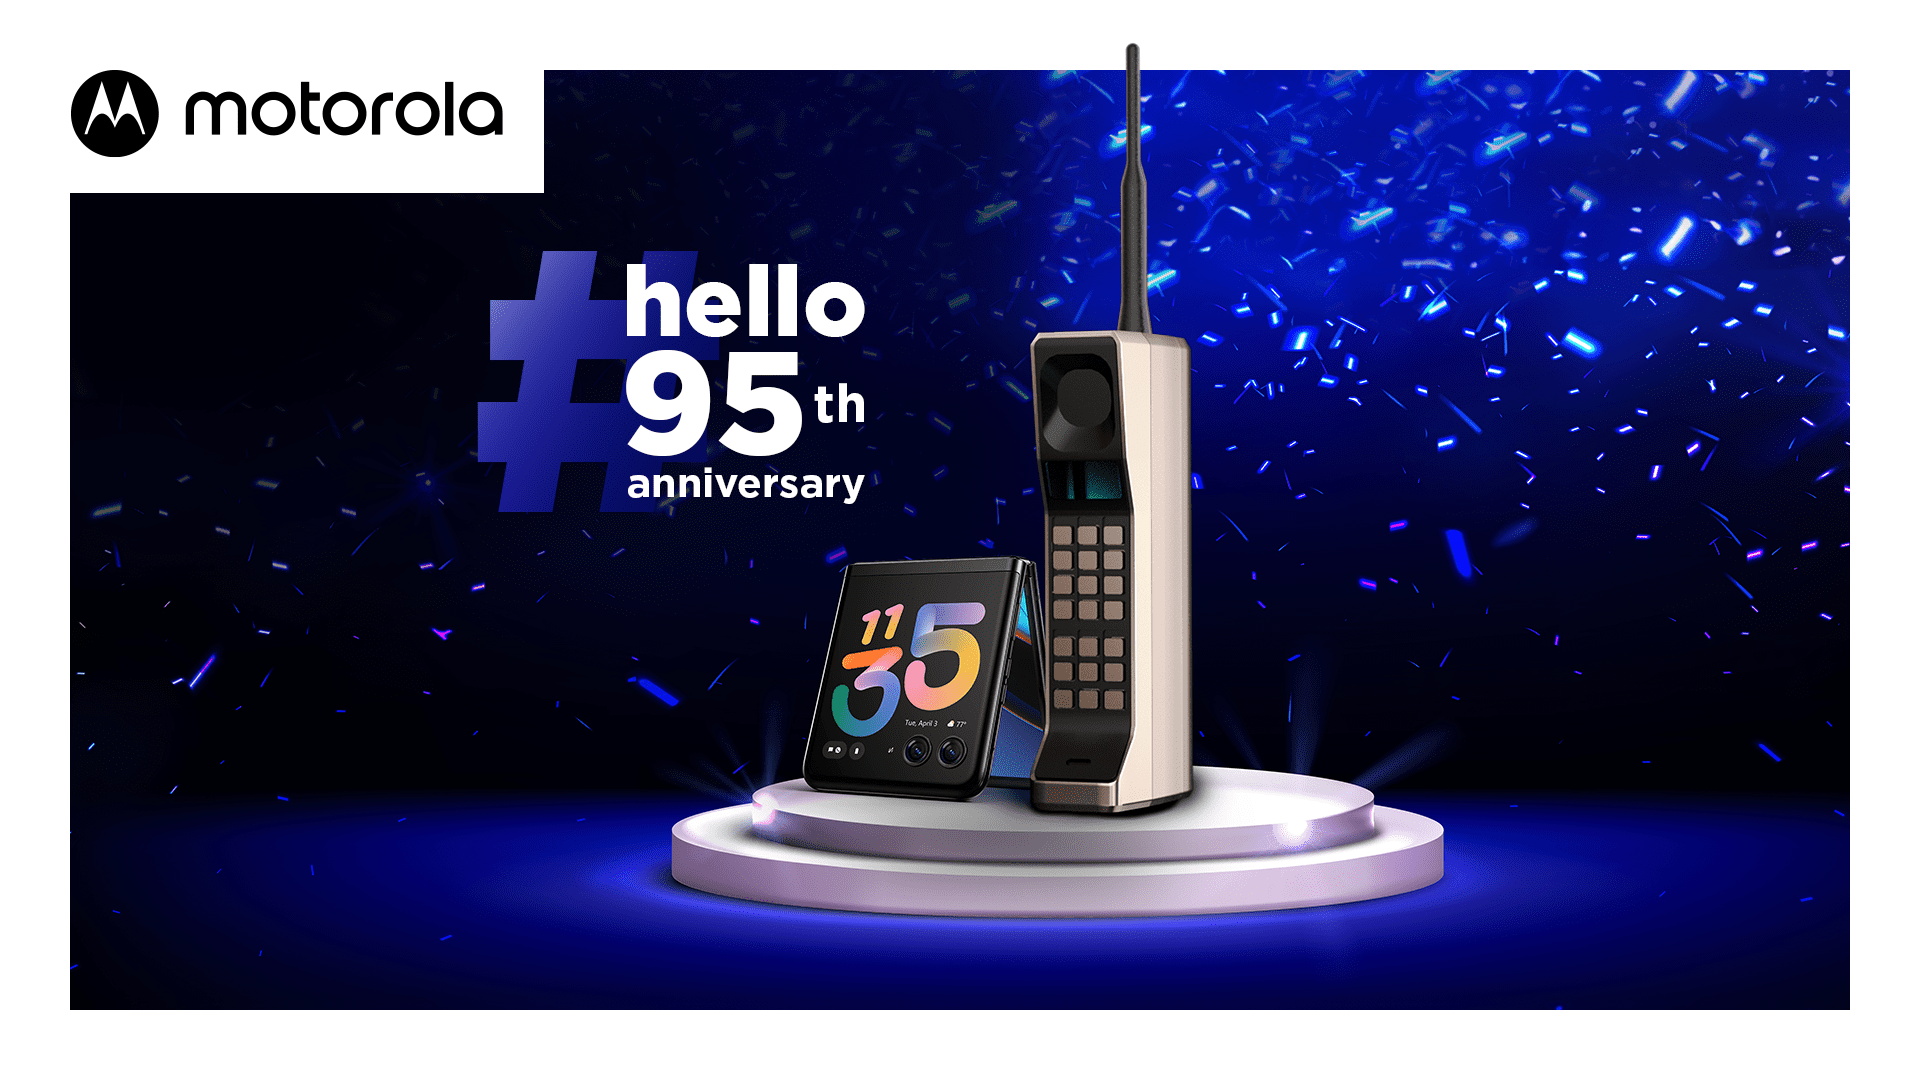 Motorola celebrates 95th anniversary, honoring the past while planning for the future